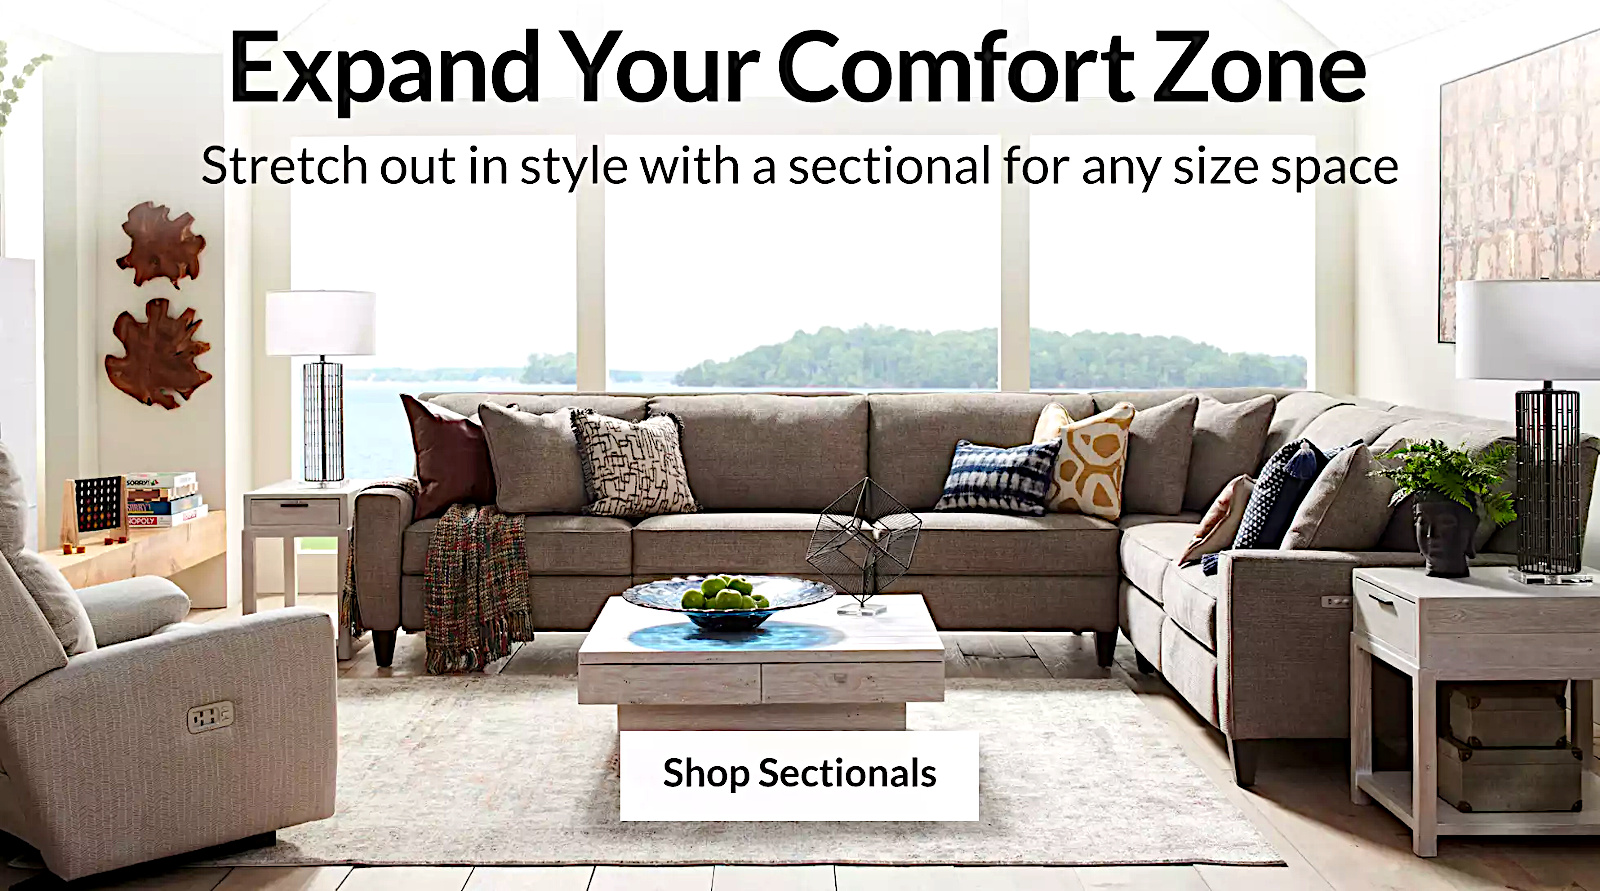 Expand your comfort zone clearance